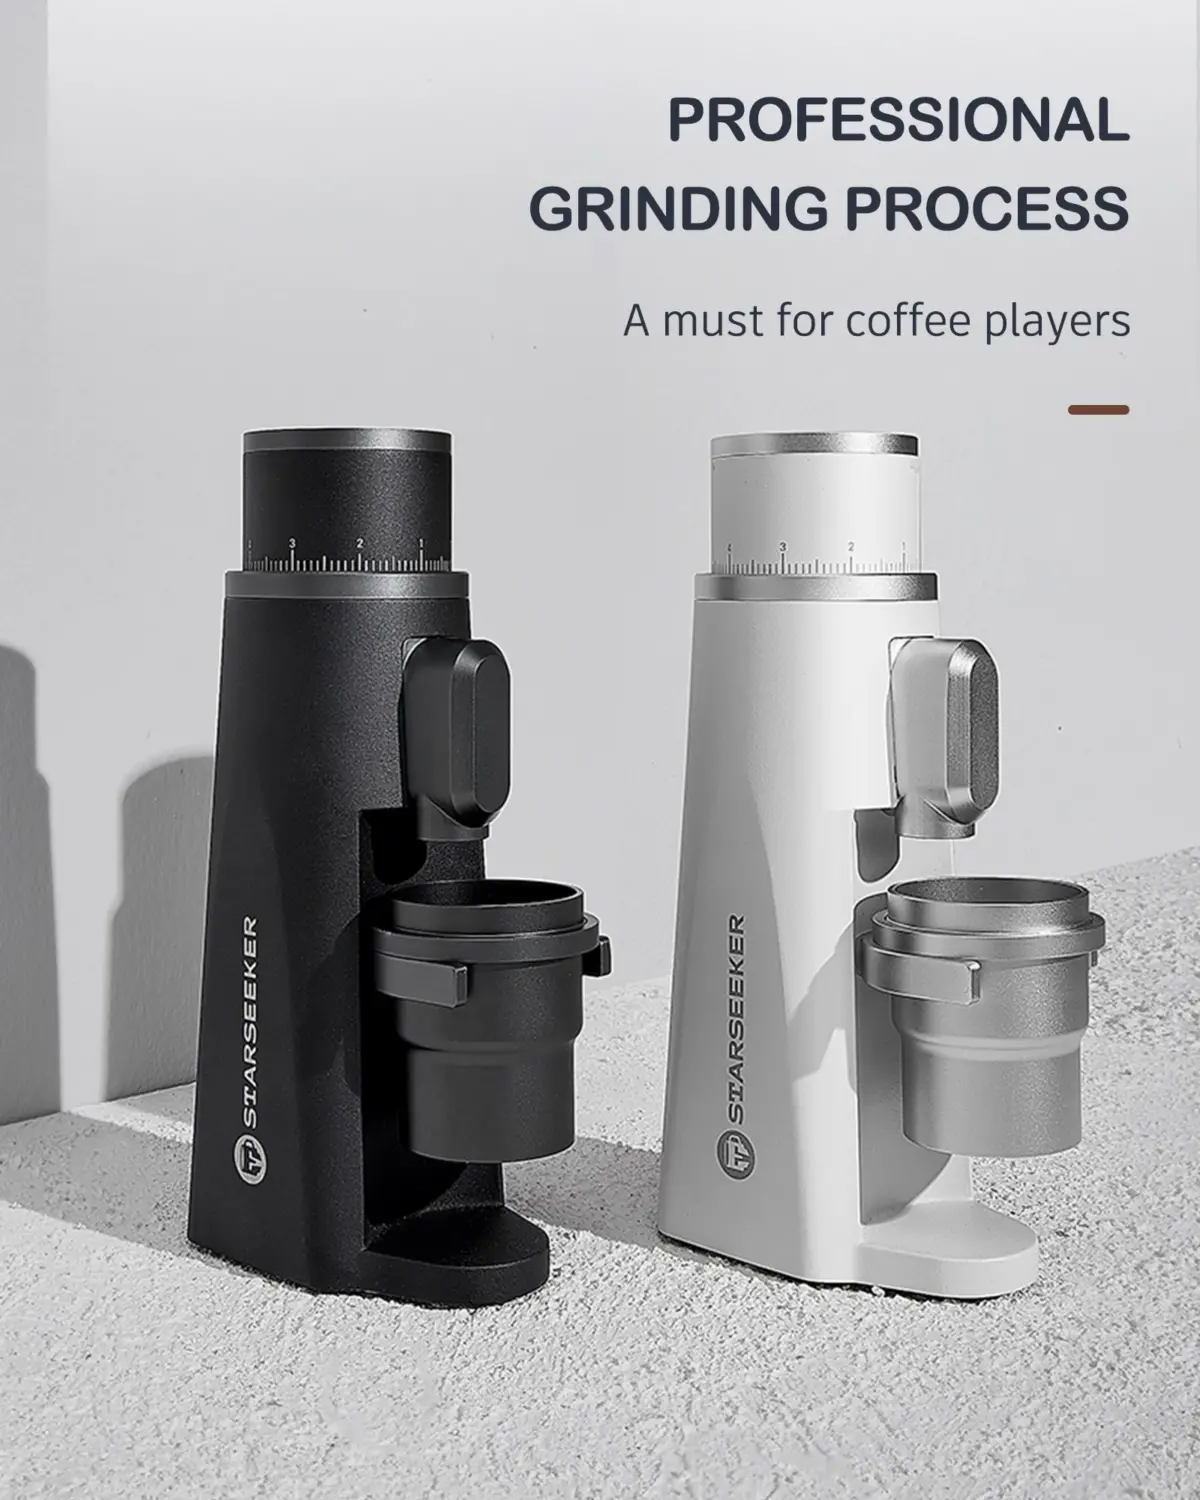 Improve your Coffee Experience with our Electric Coffee Grinder